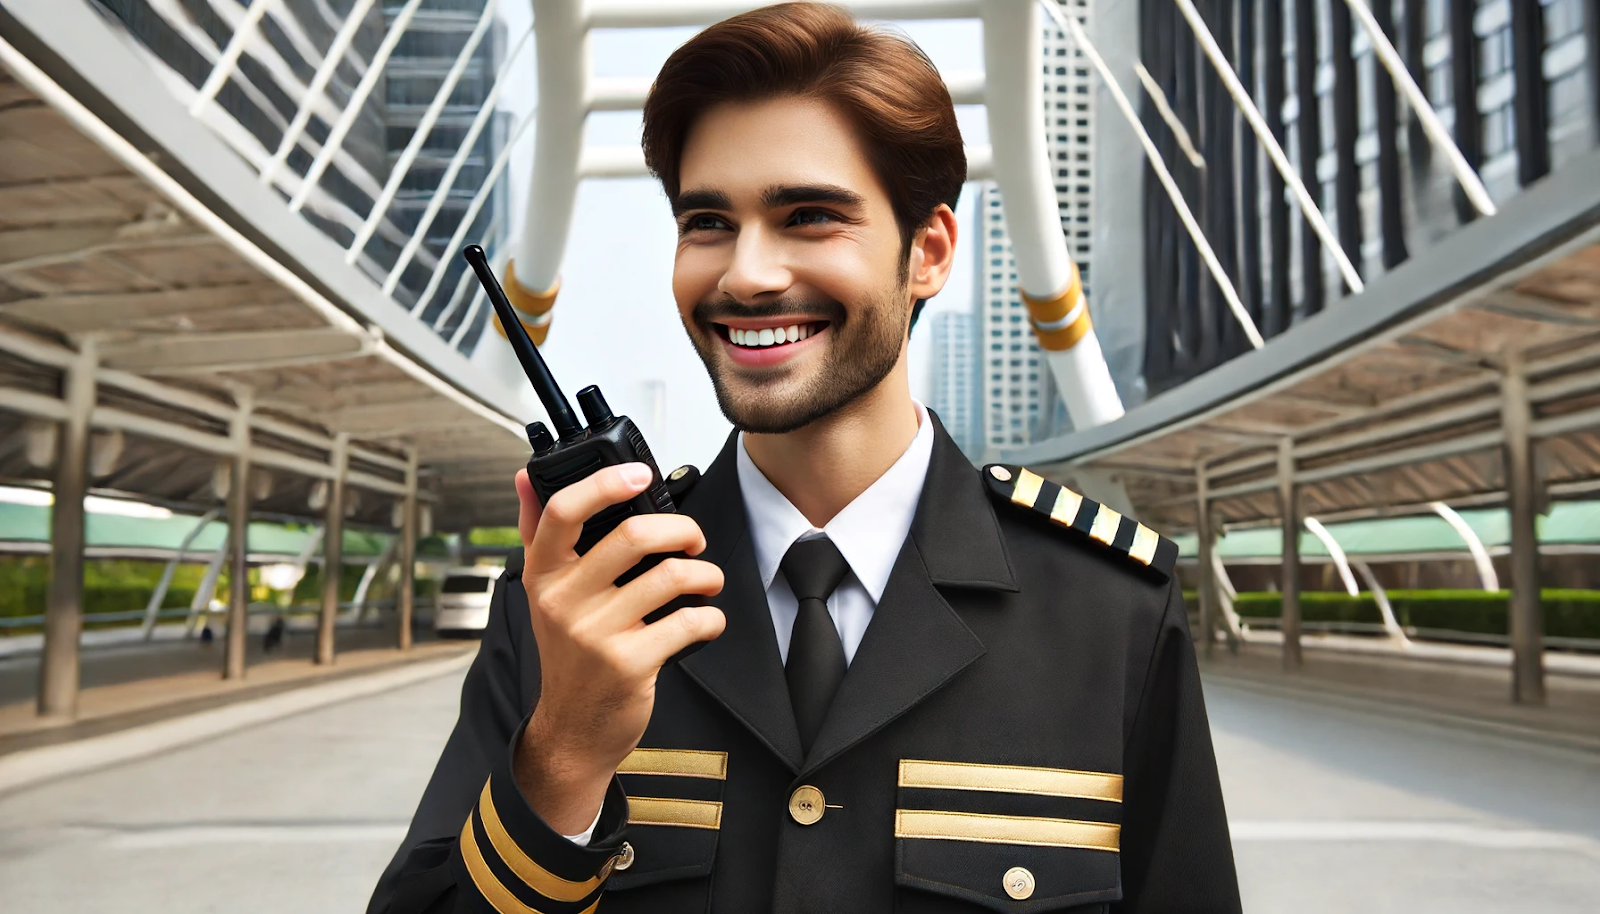 Cheerful security guard in black and gold uniform communicating with a two-way radio, representing effective security operations.